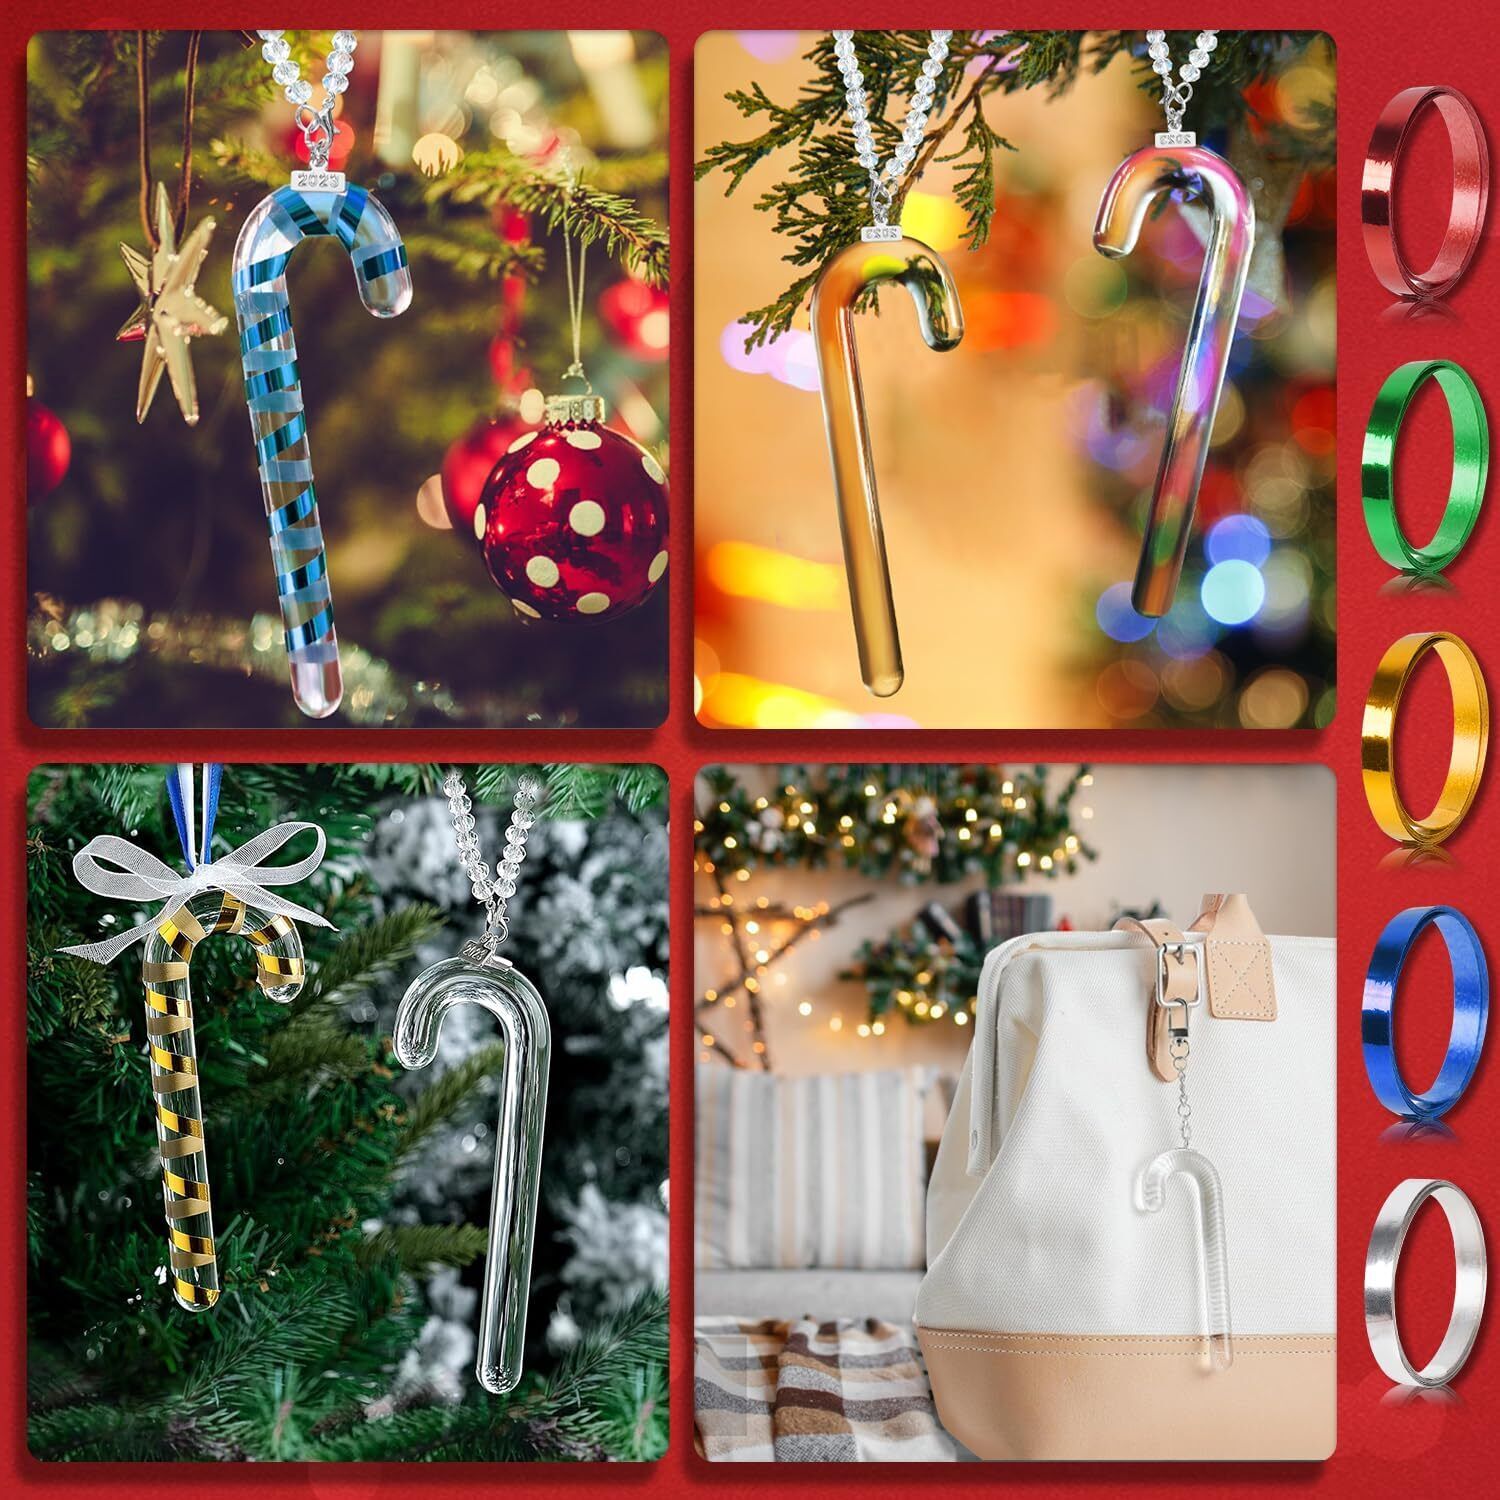 2023 Annual Crystal Candy Cane Christmas Decorations  Ornaments Sun catcher